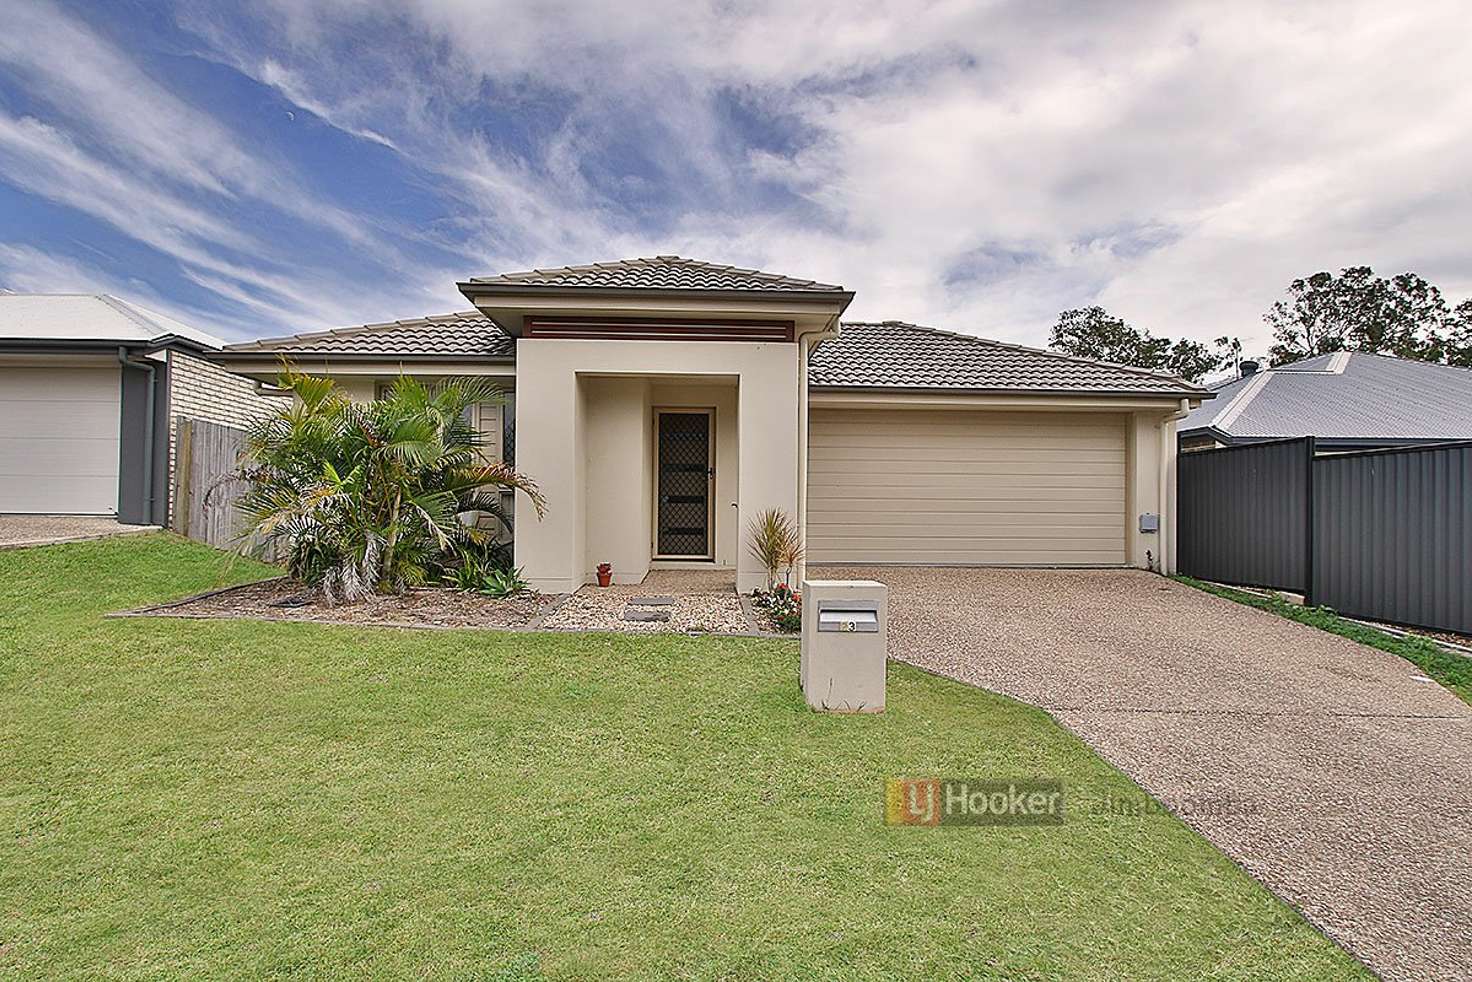 Main view of Homely house listing, 23 Songbird Cct, Jimboomba QLD 4280